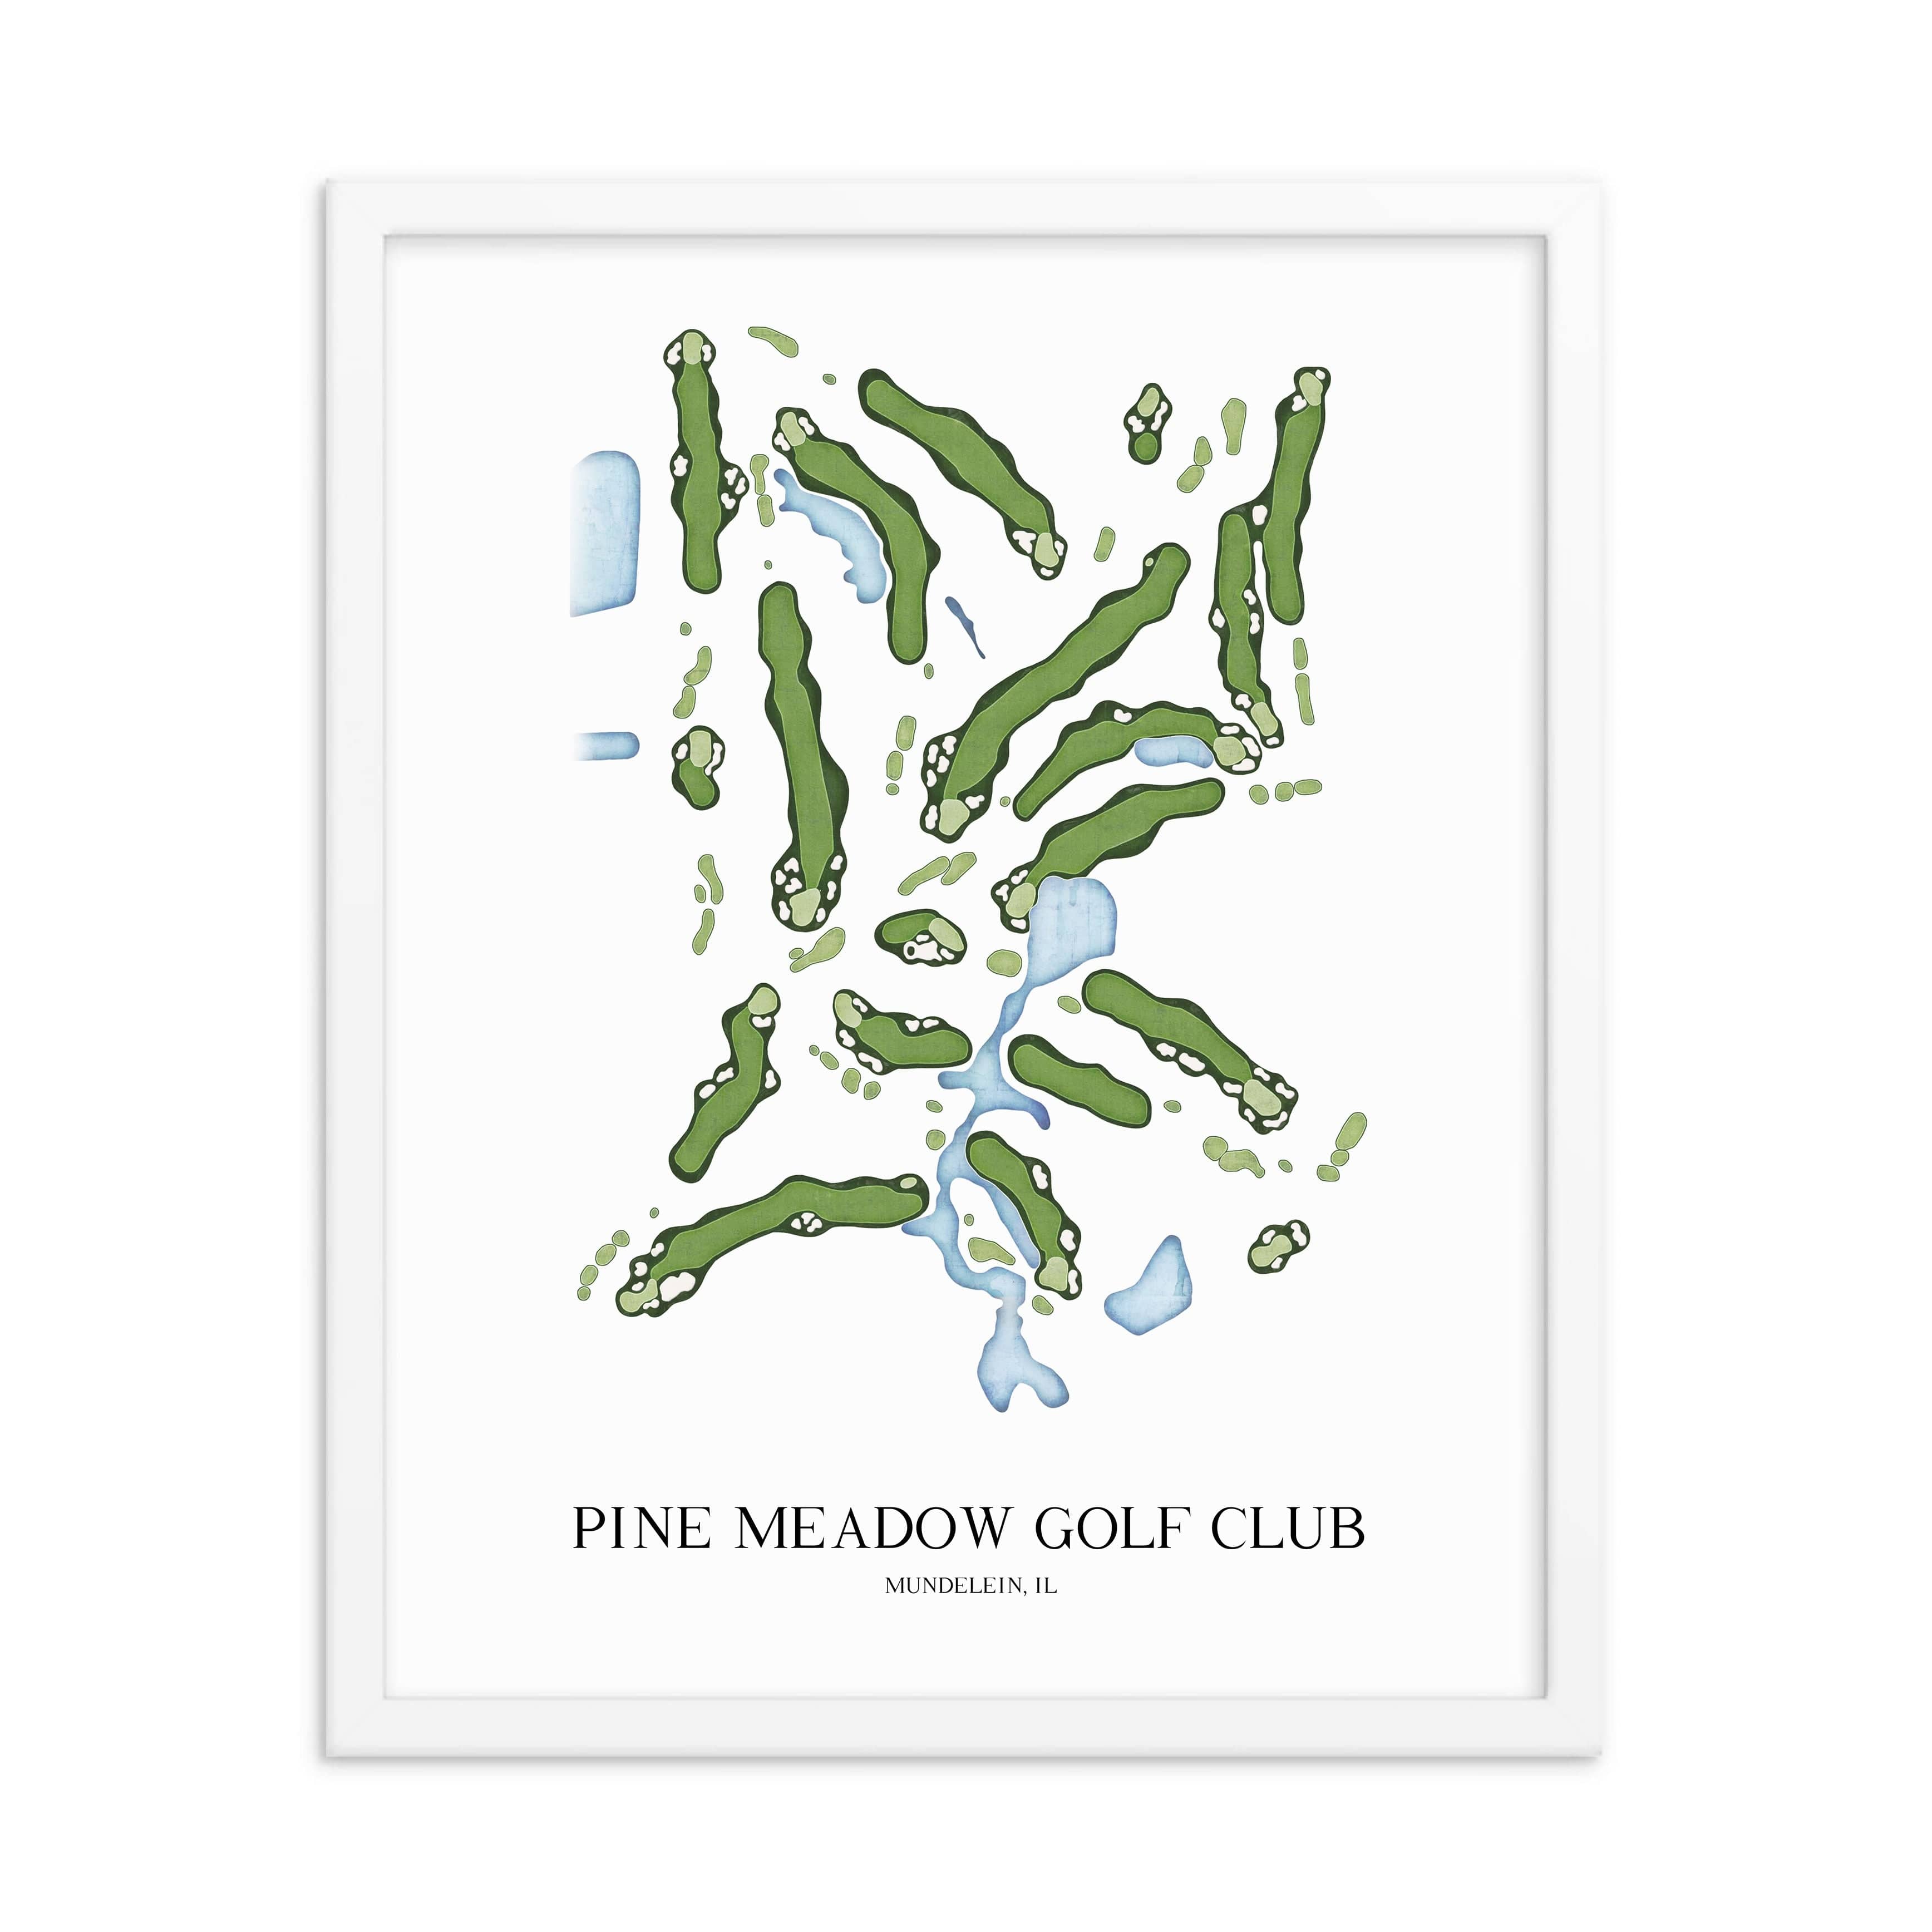 The 19th Hole Golf Shop - Golf Course Prints -  Pine Meadow Golf Club Golf Course Map